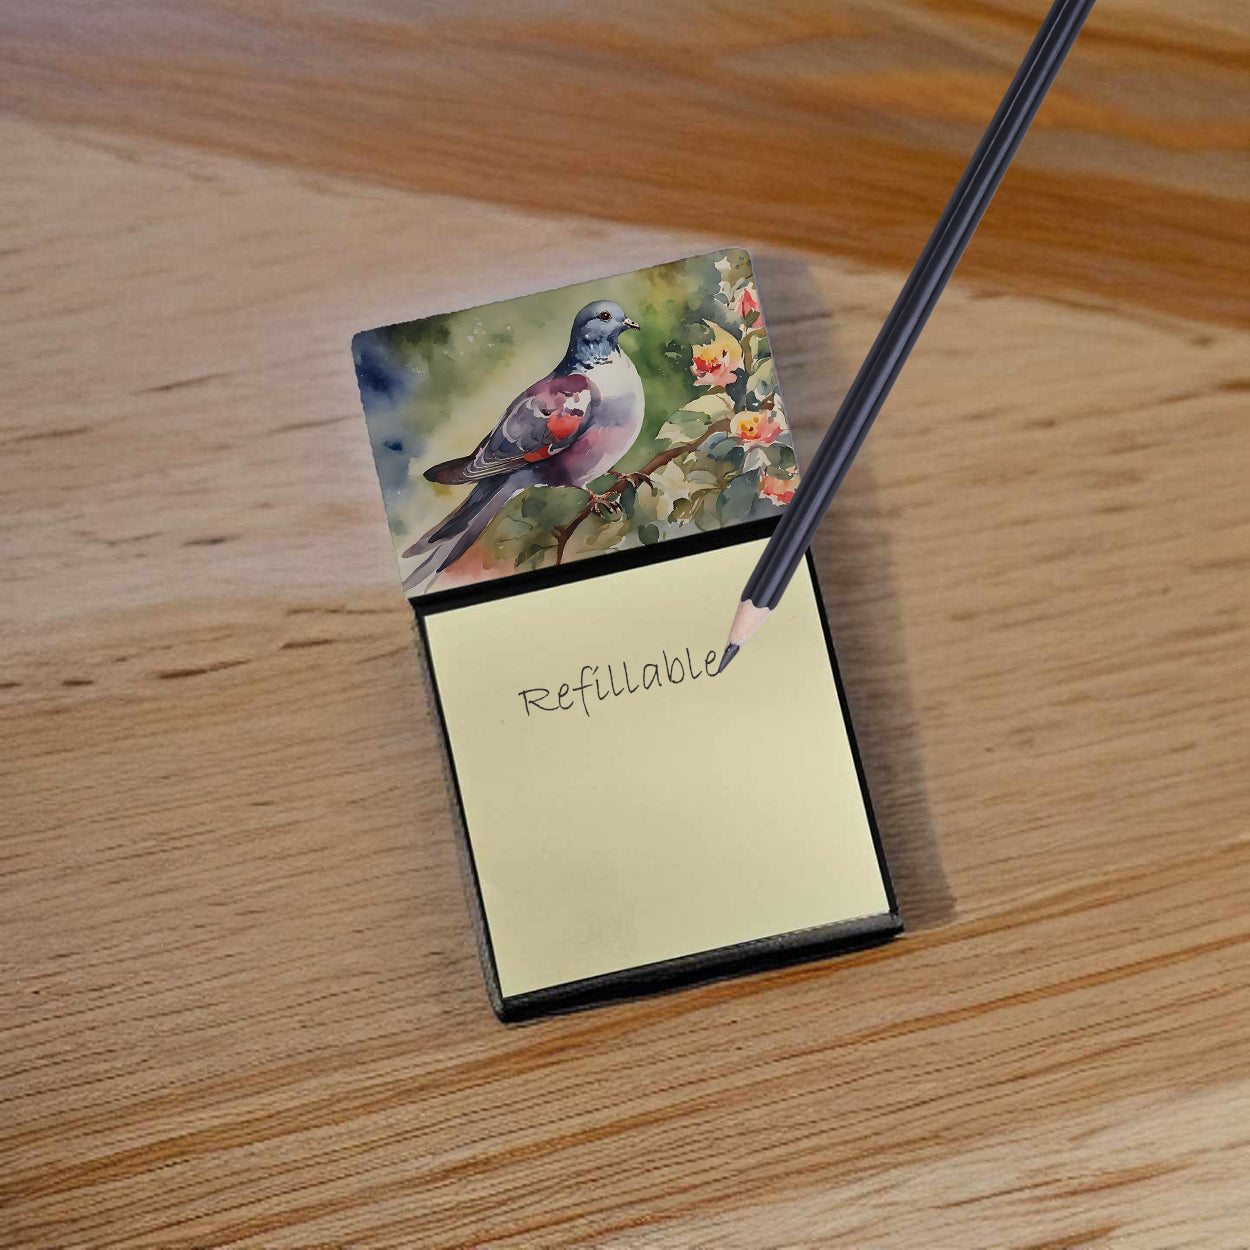 Buy this Pigeon Sticky Note Holder